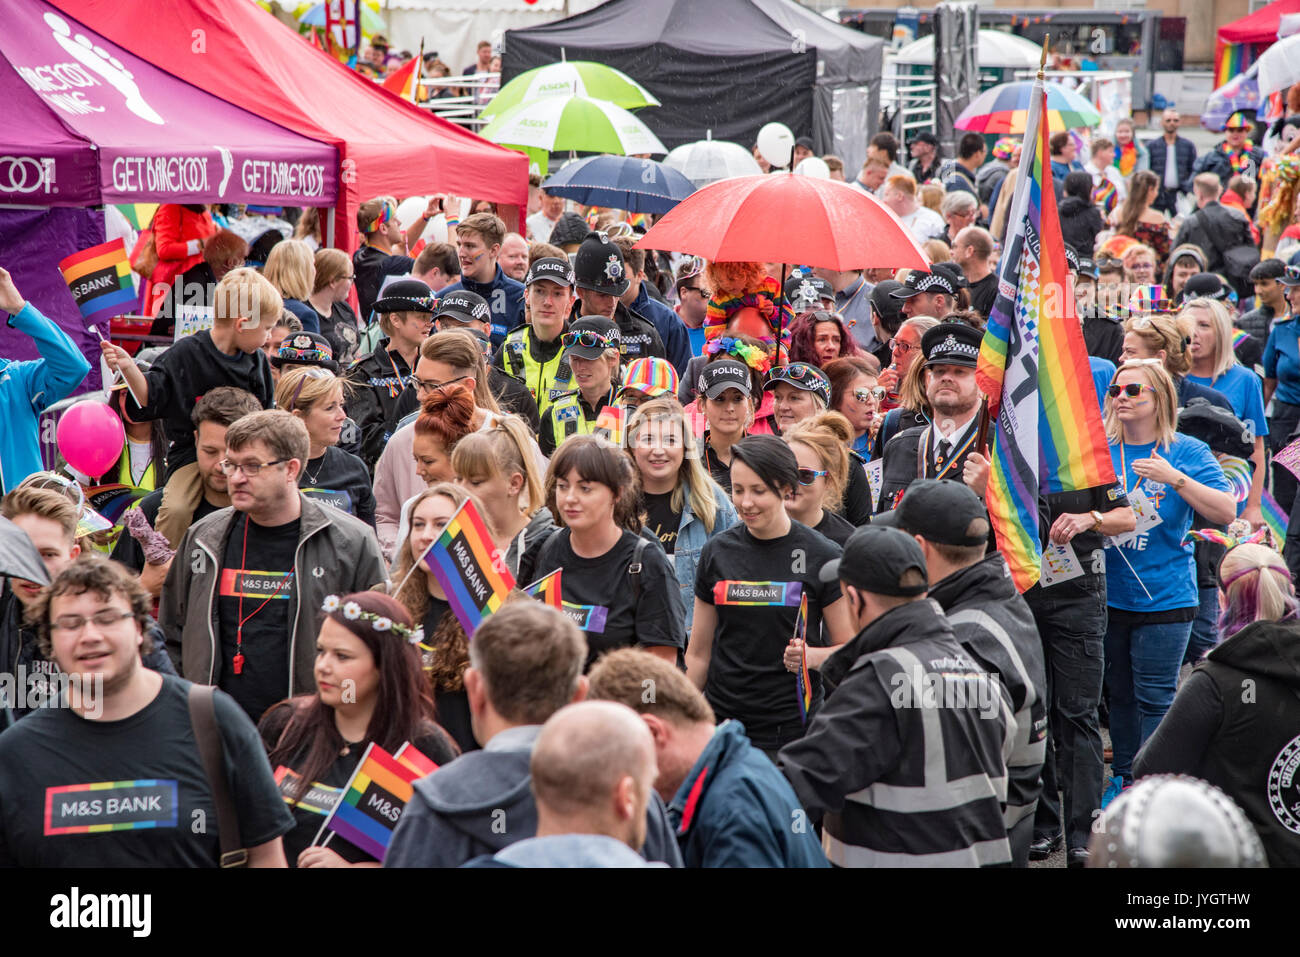 Chester. United Kingdom. 19th August 2017. Scenes from the Chester Pride parade today in the centre of Chester. Hundreds turned out in the rain to take part in LGBT celebration with many dressed in colourfull costumes. The event is supported by local business. Credit: John Davidson Photos/Alamy Live News Stock Photo